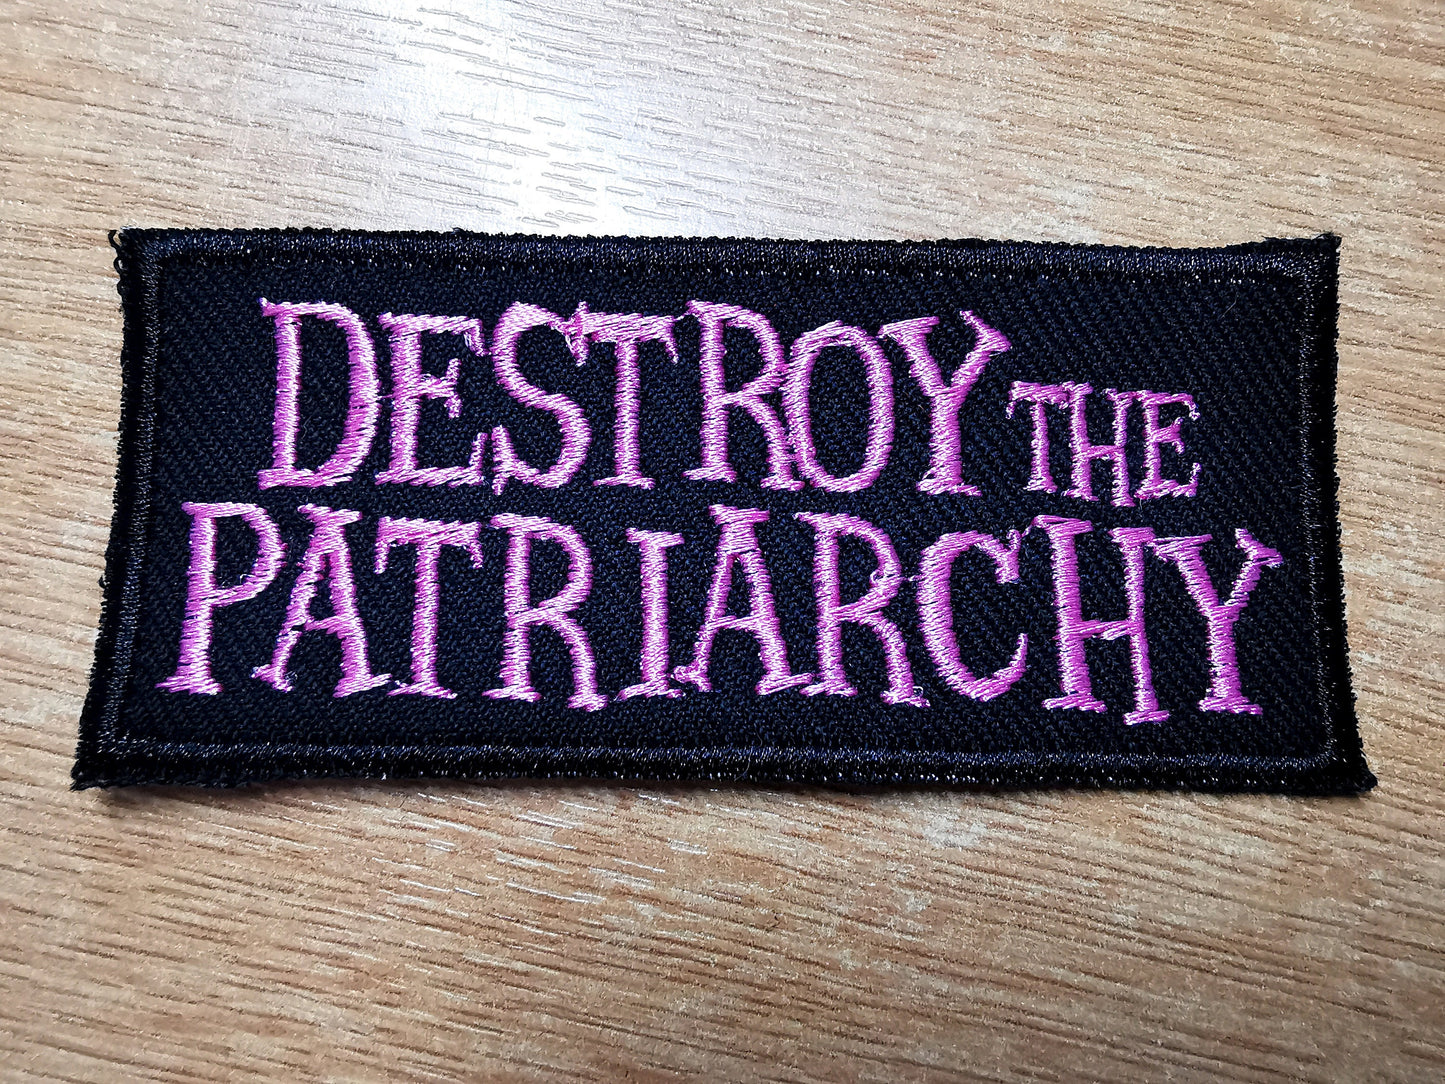 Destroy the Patriarchy Iron On Embroidered Patch Pink Feminist and Feminism anti-misogyny Protest patches